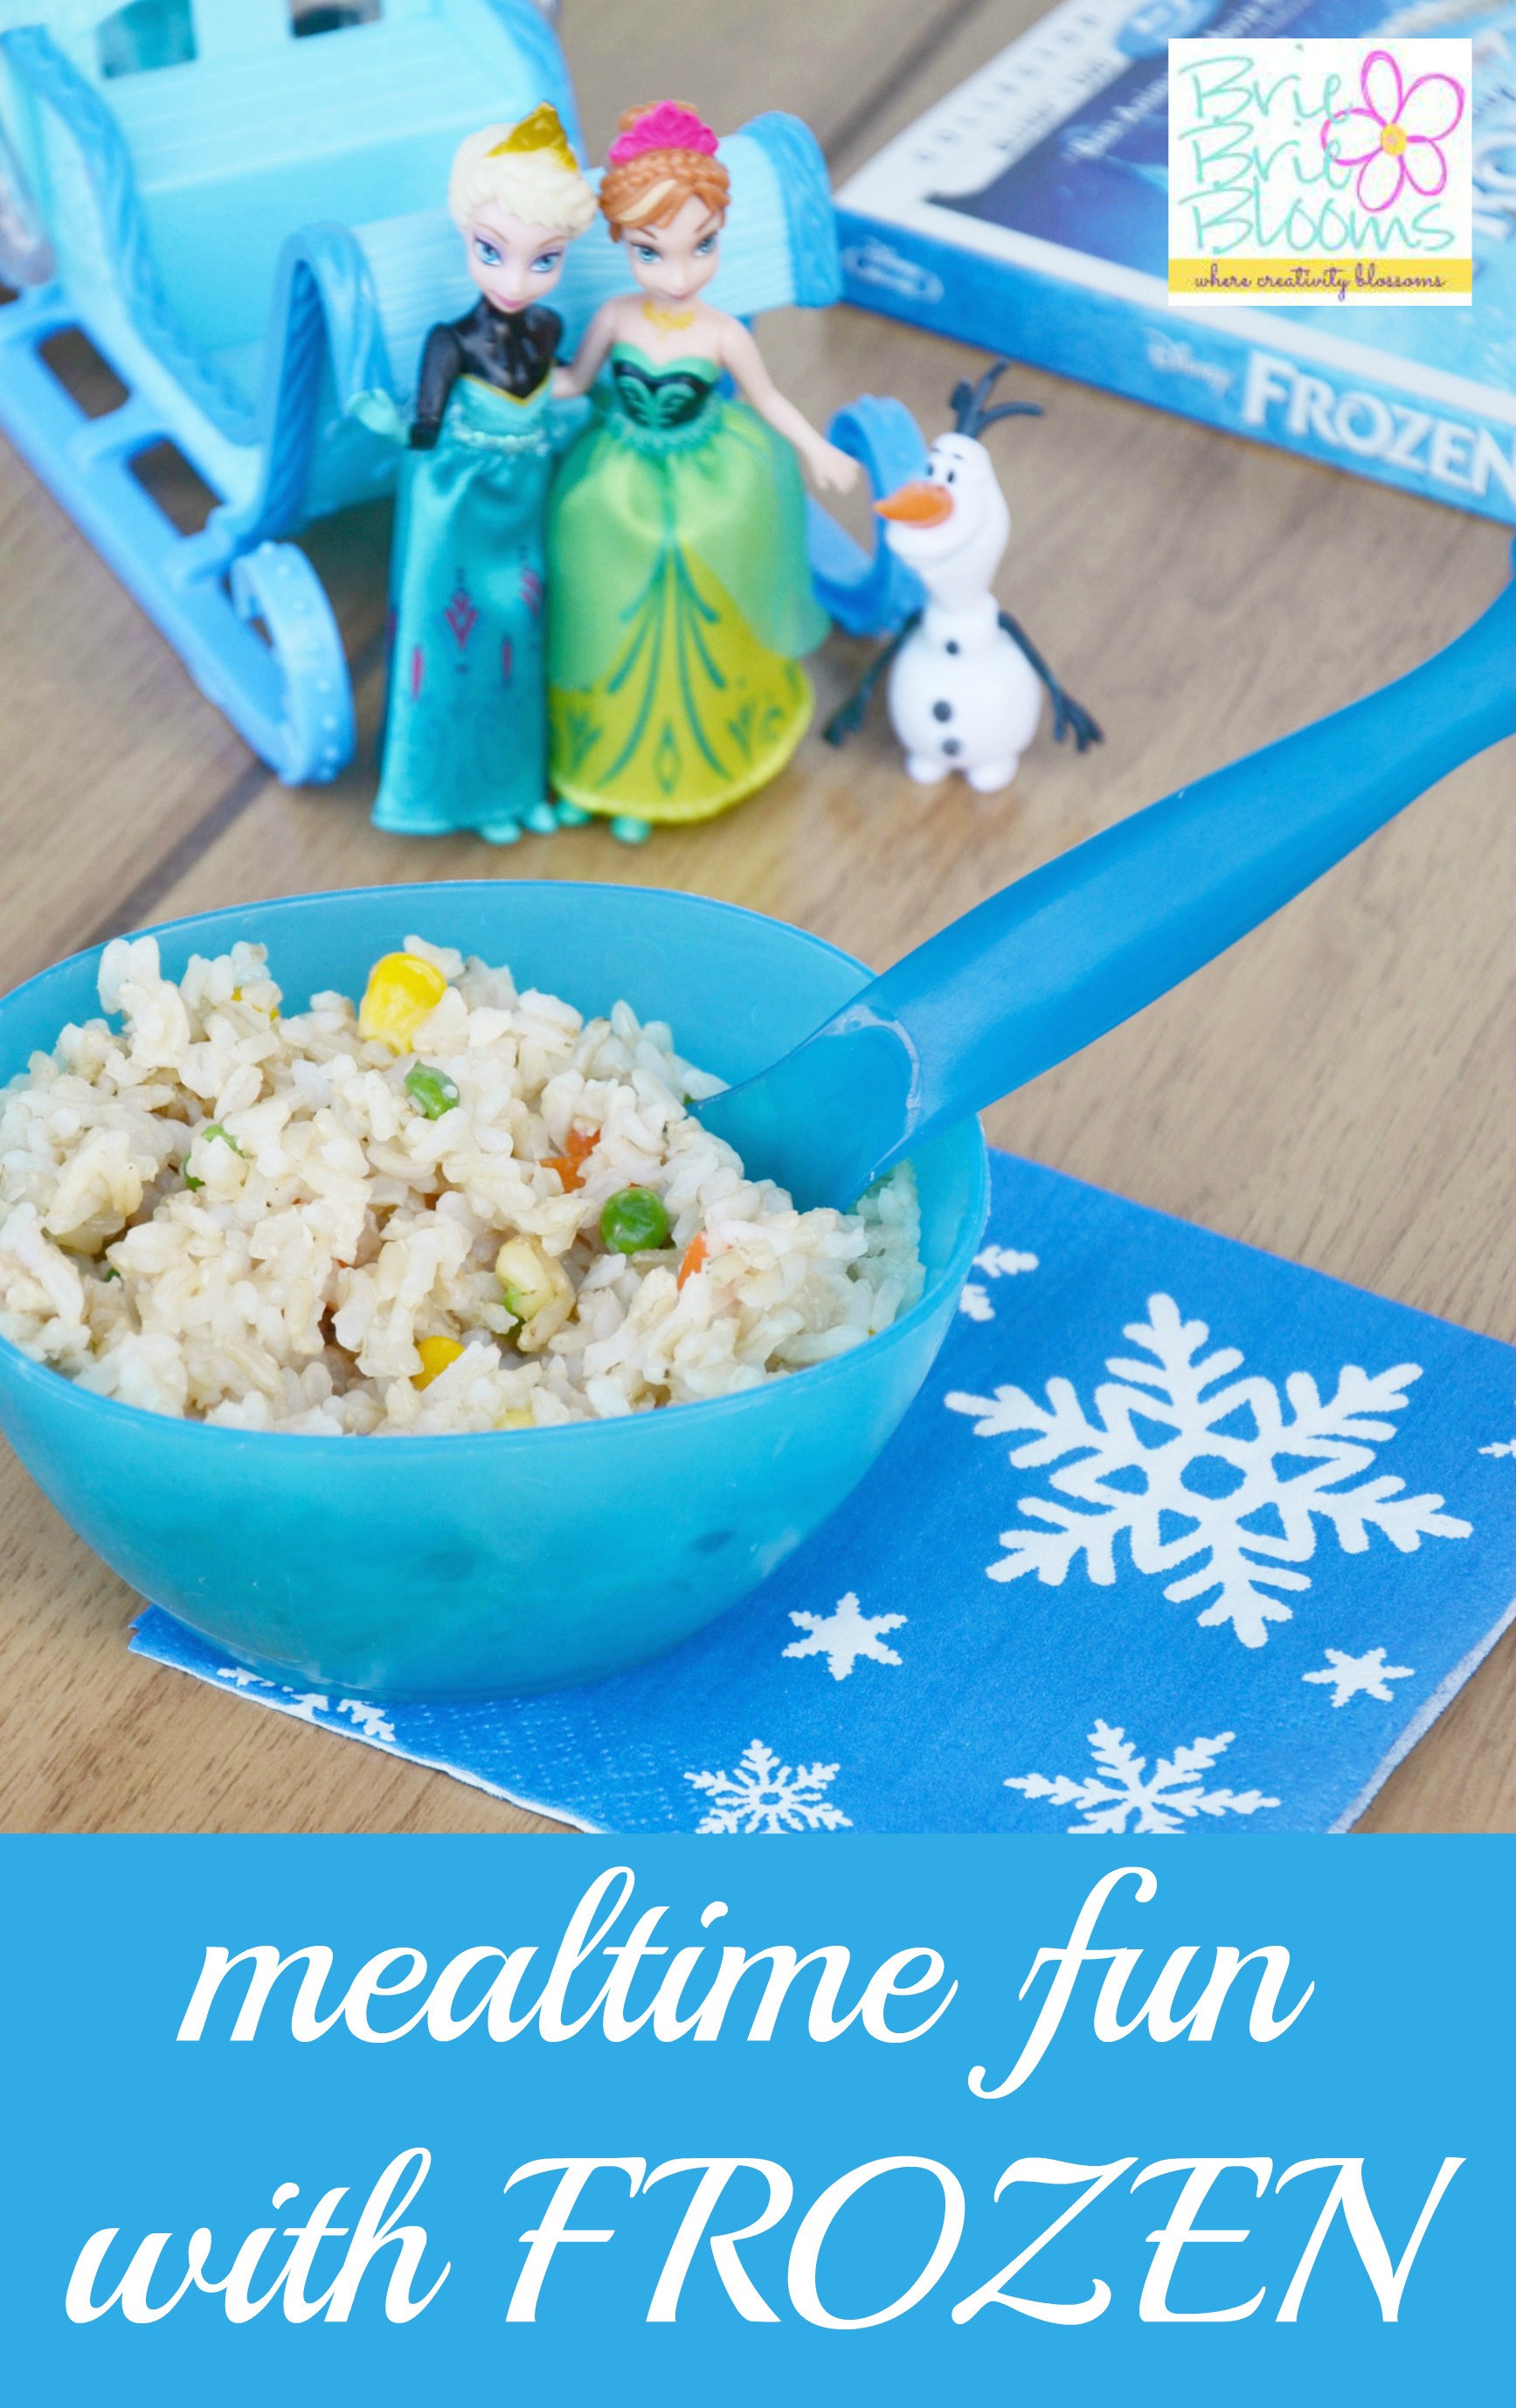 Meal-time-fun-with-FROZEN-DVD-and-kidfresh-meals